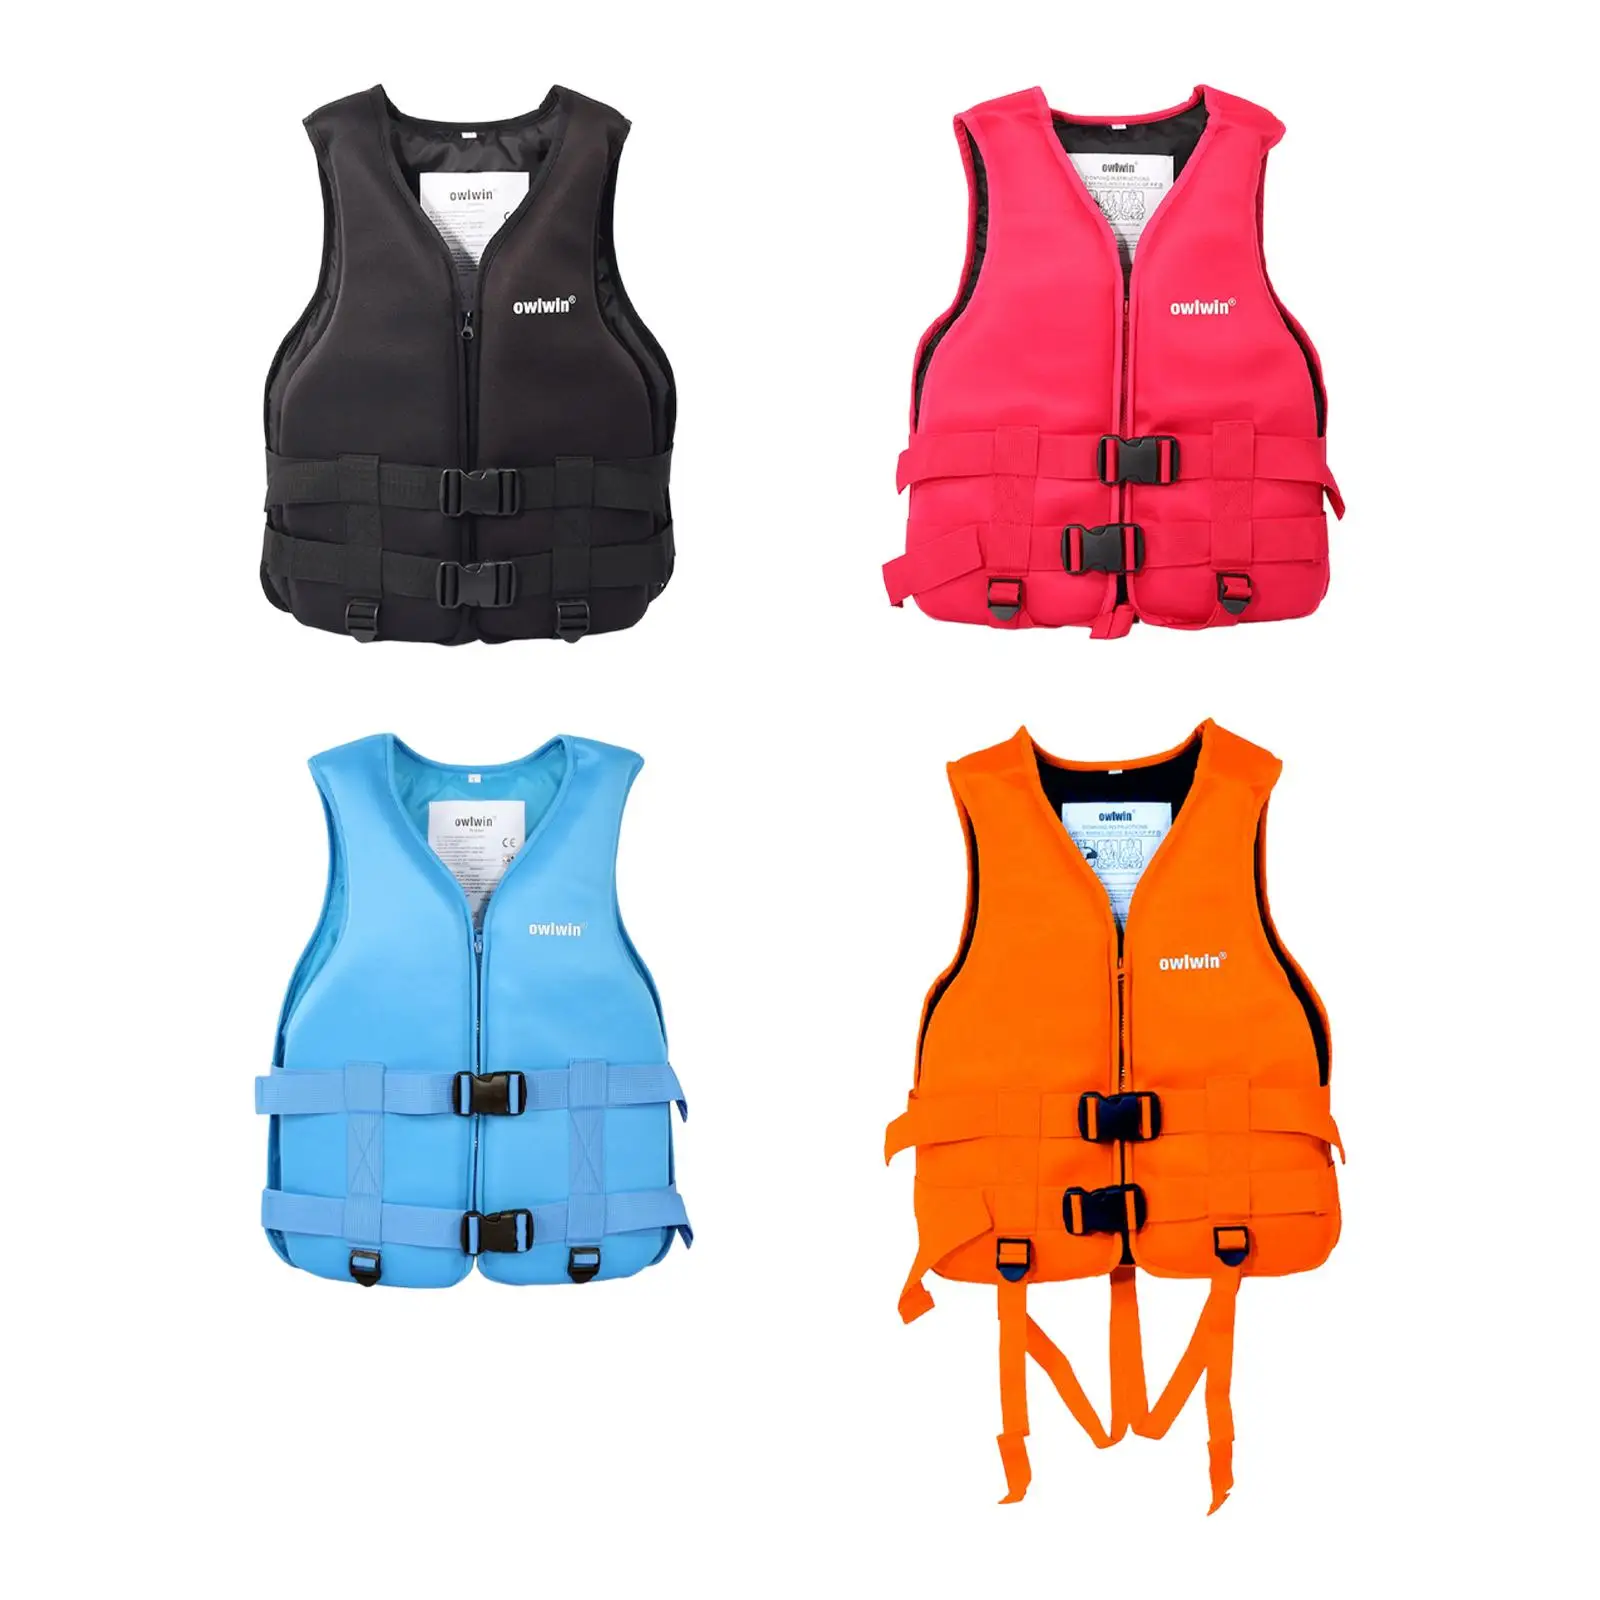 Water Sports Life Jacket Swimming Vest for Men Ladies Anti Scratch Elastic and Soft Fabric Waterproof Skin Friendly Comfortable